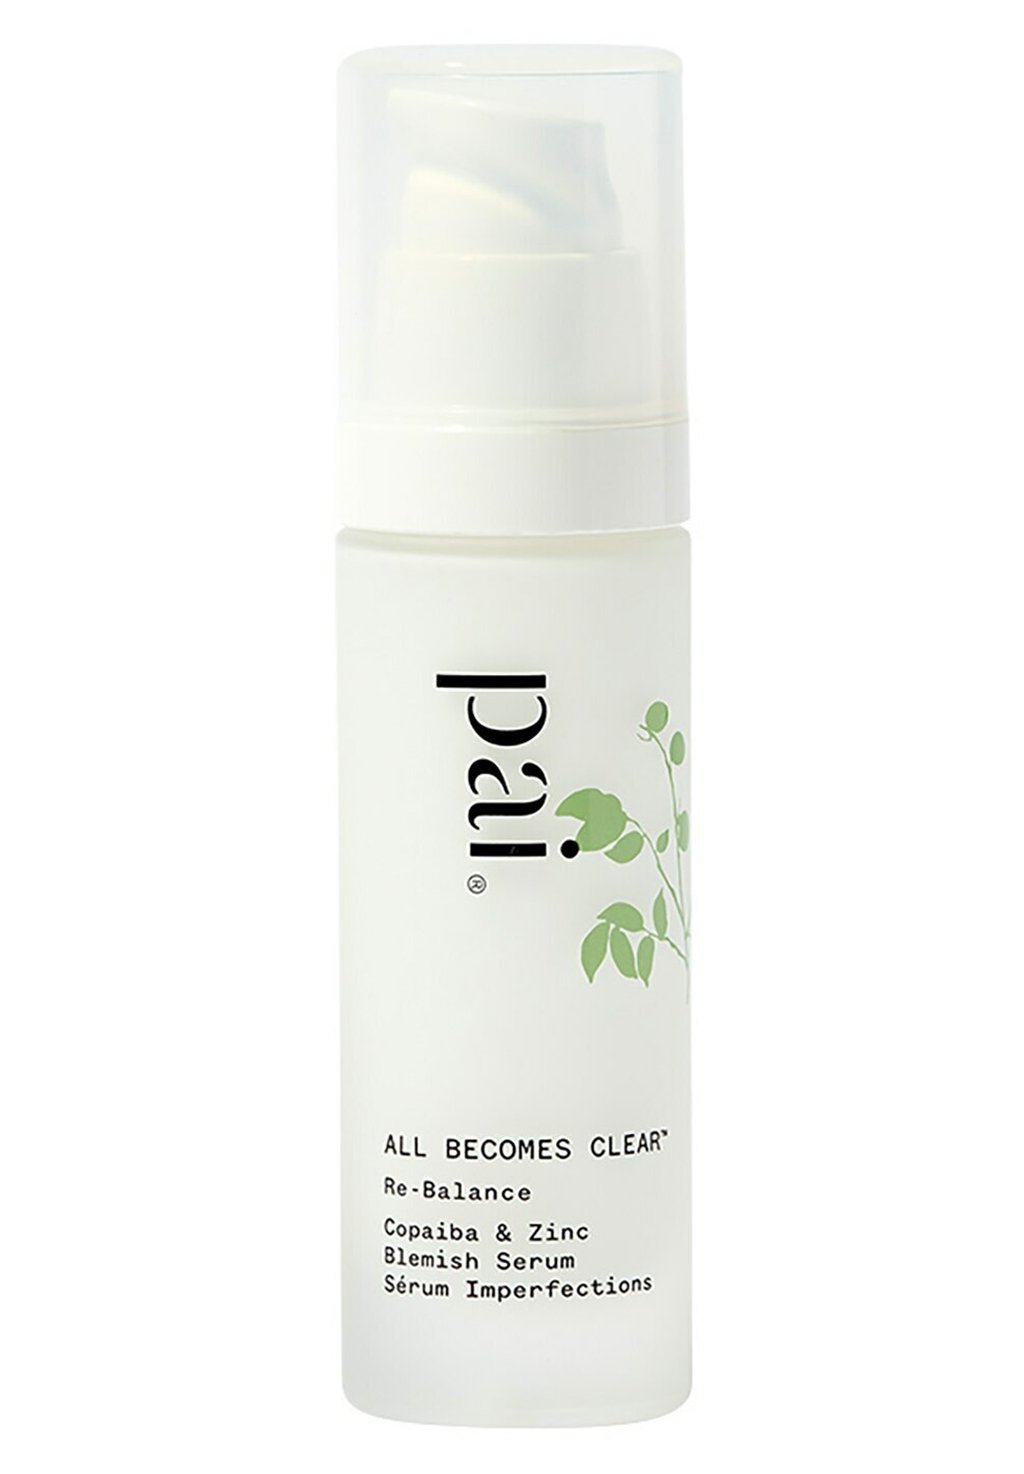 Сыворотка All Becomes Clear Pai Skincare